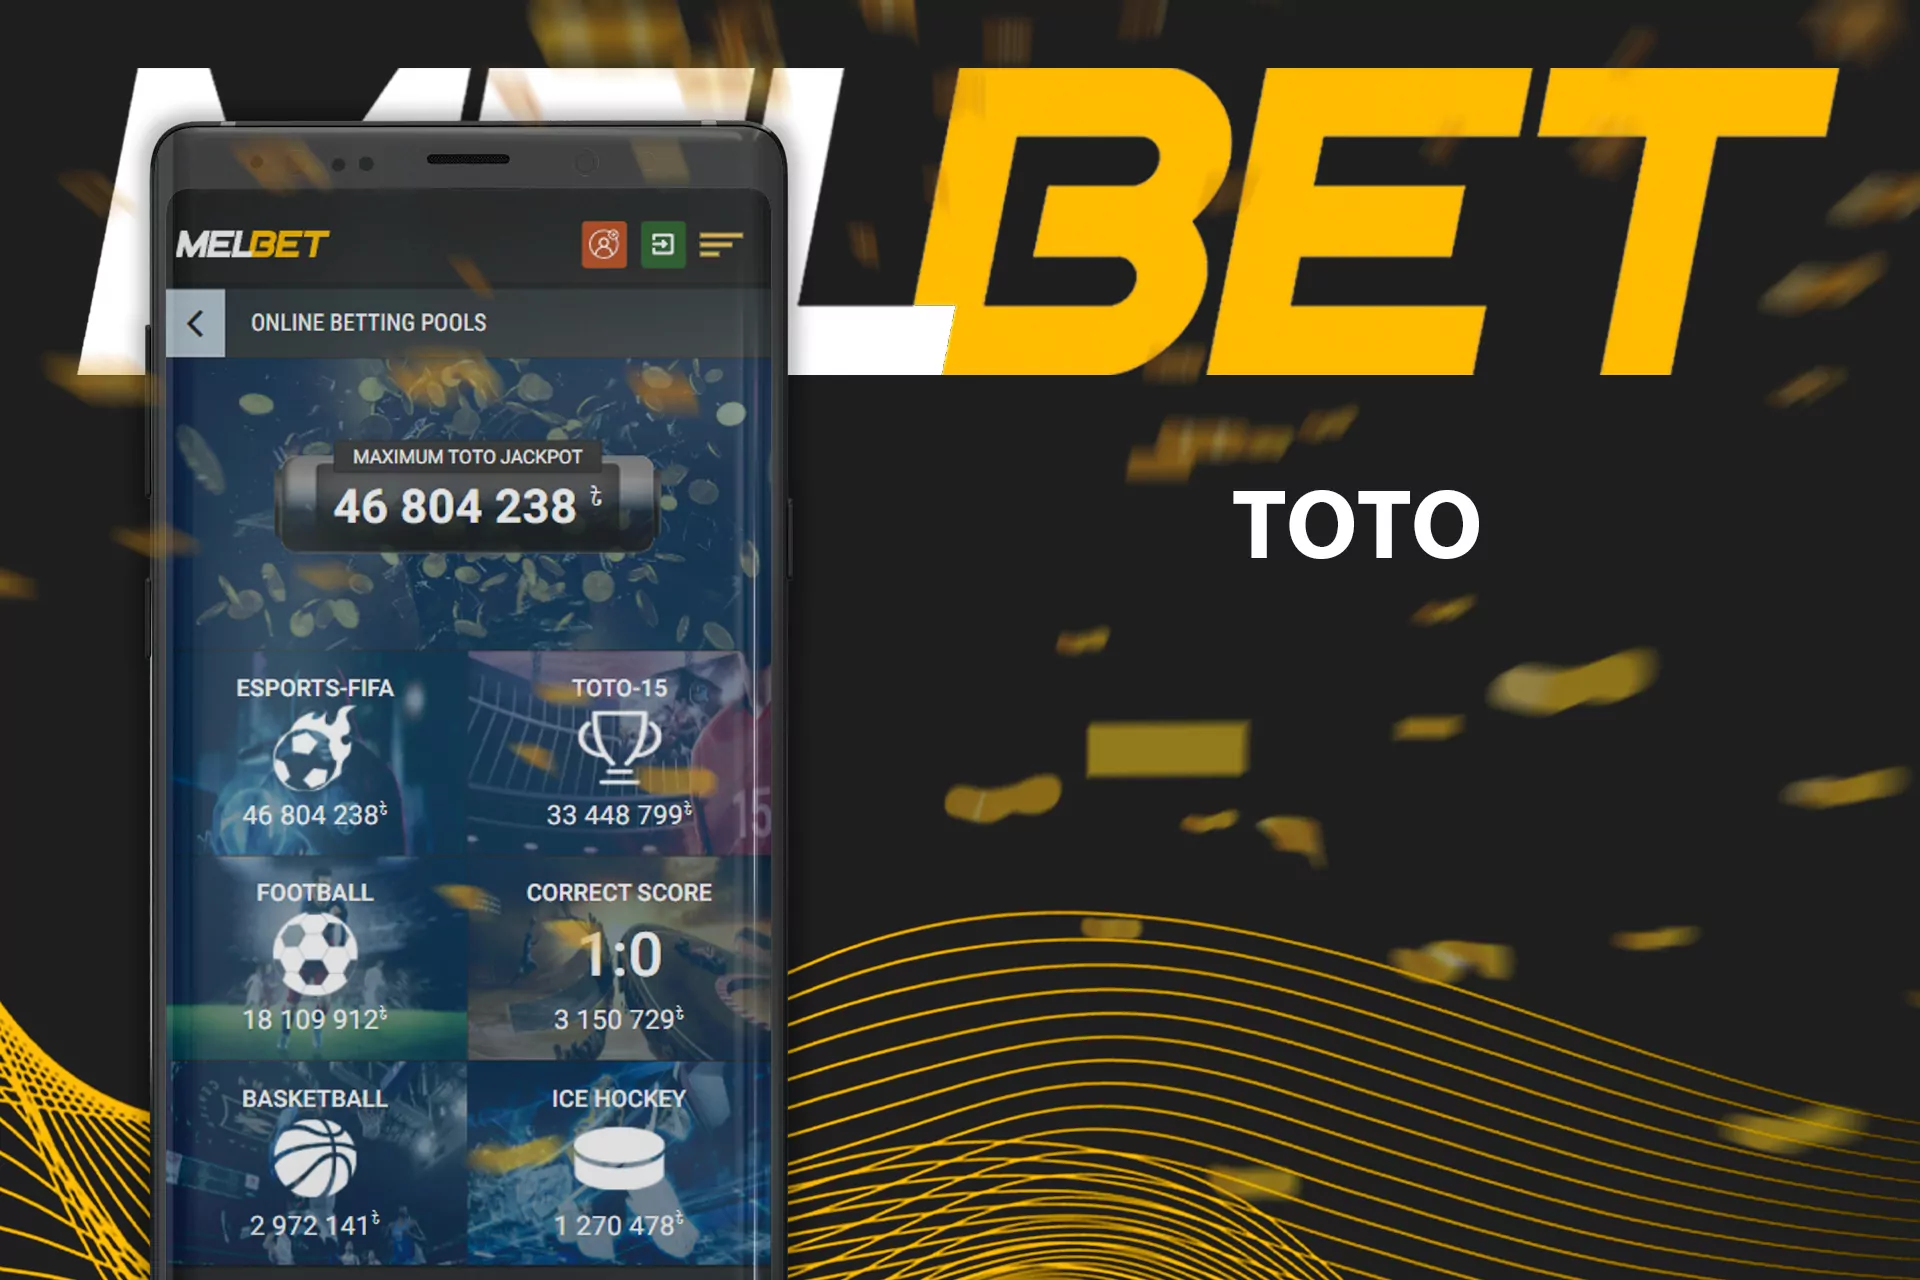 Play TOTO games in the Melbet casino and win a jackpot.